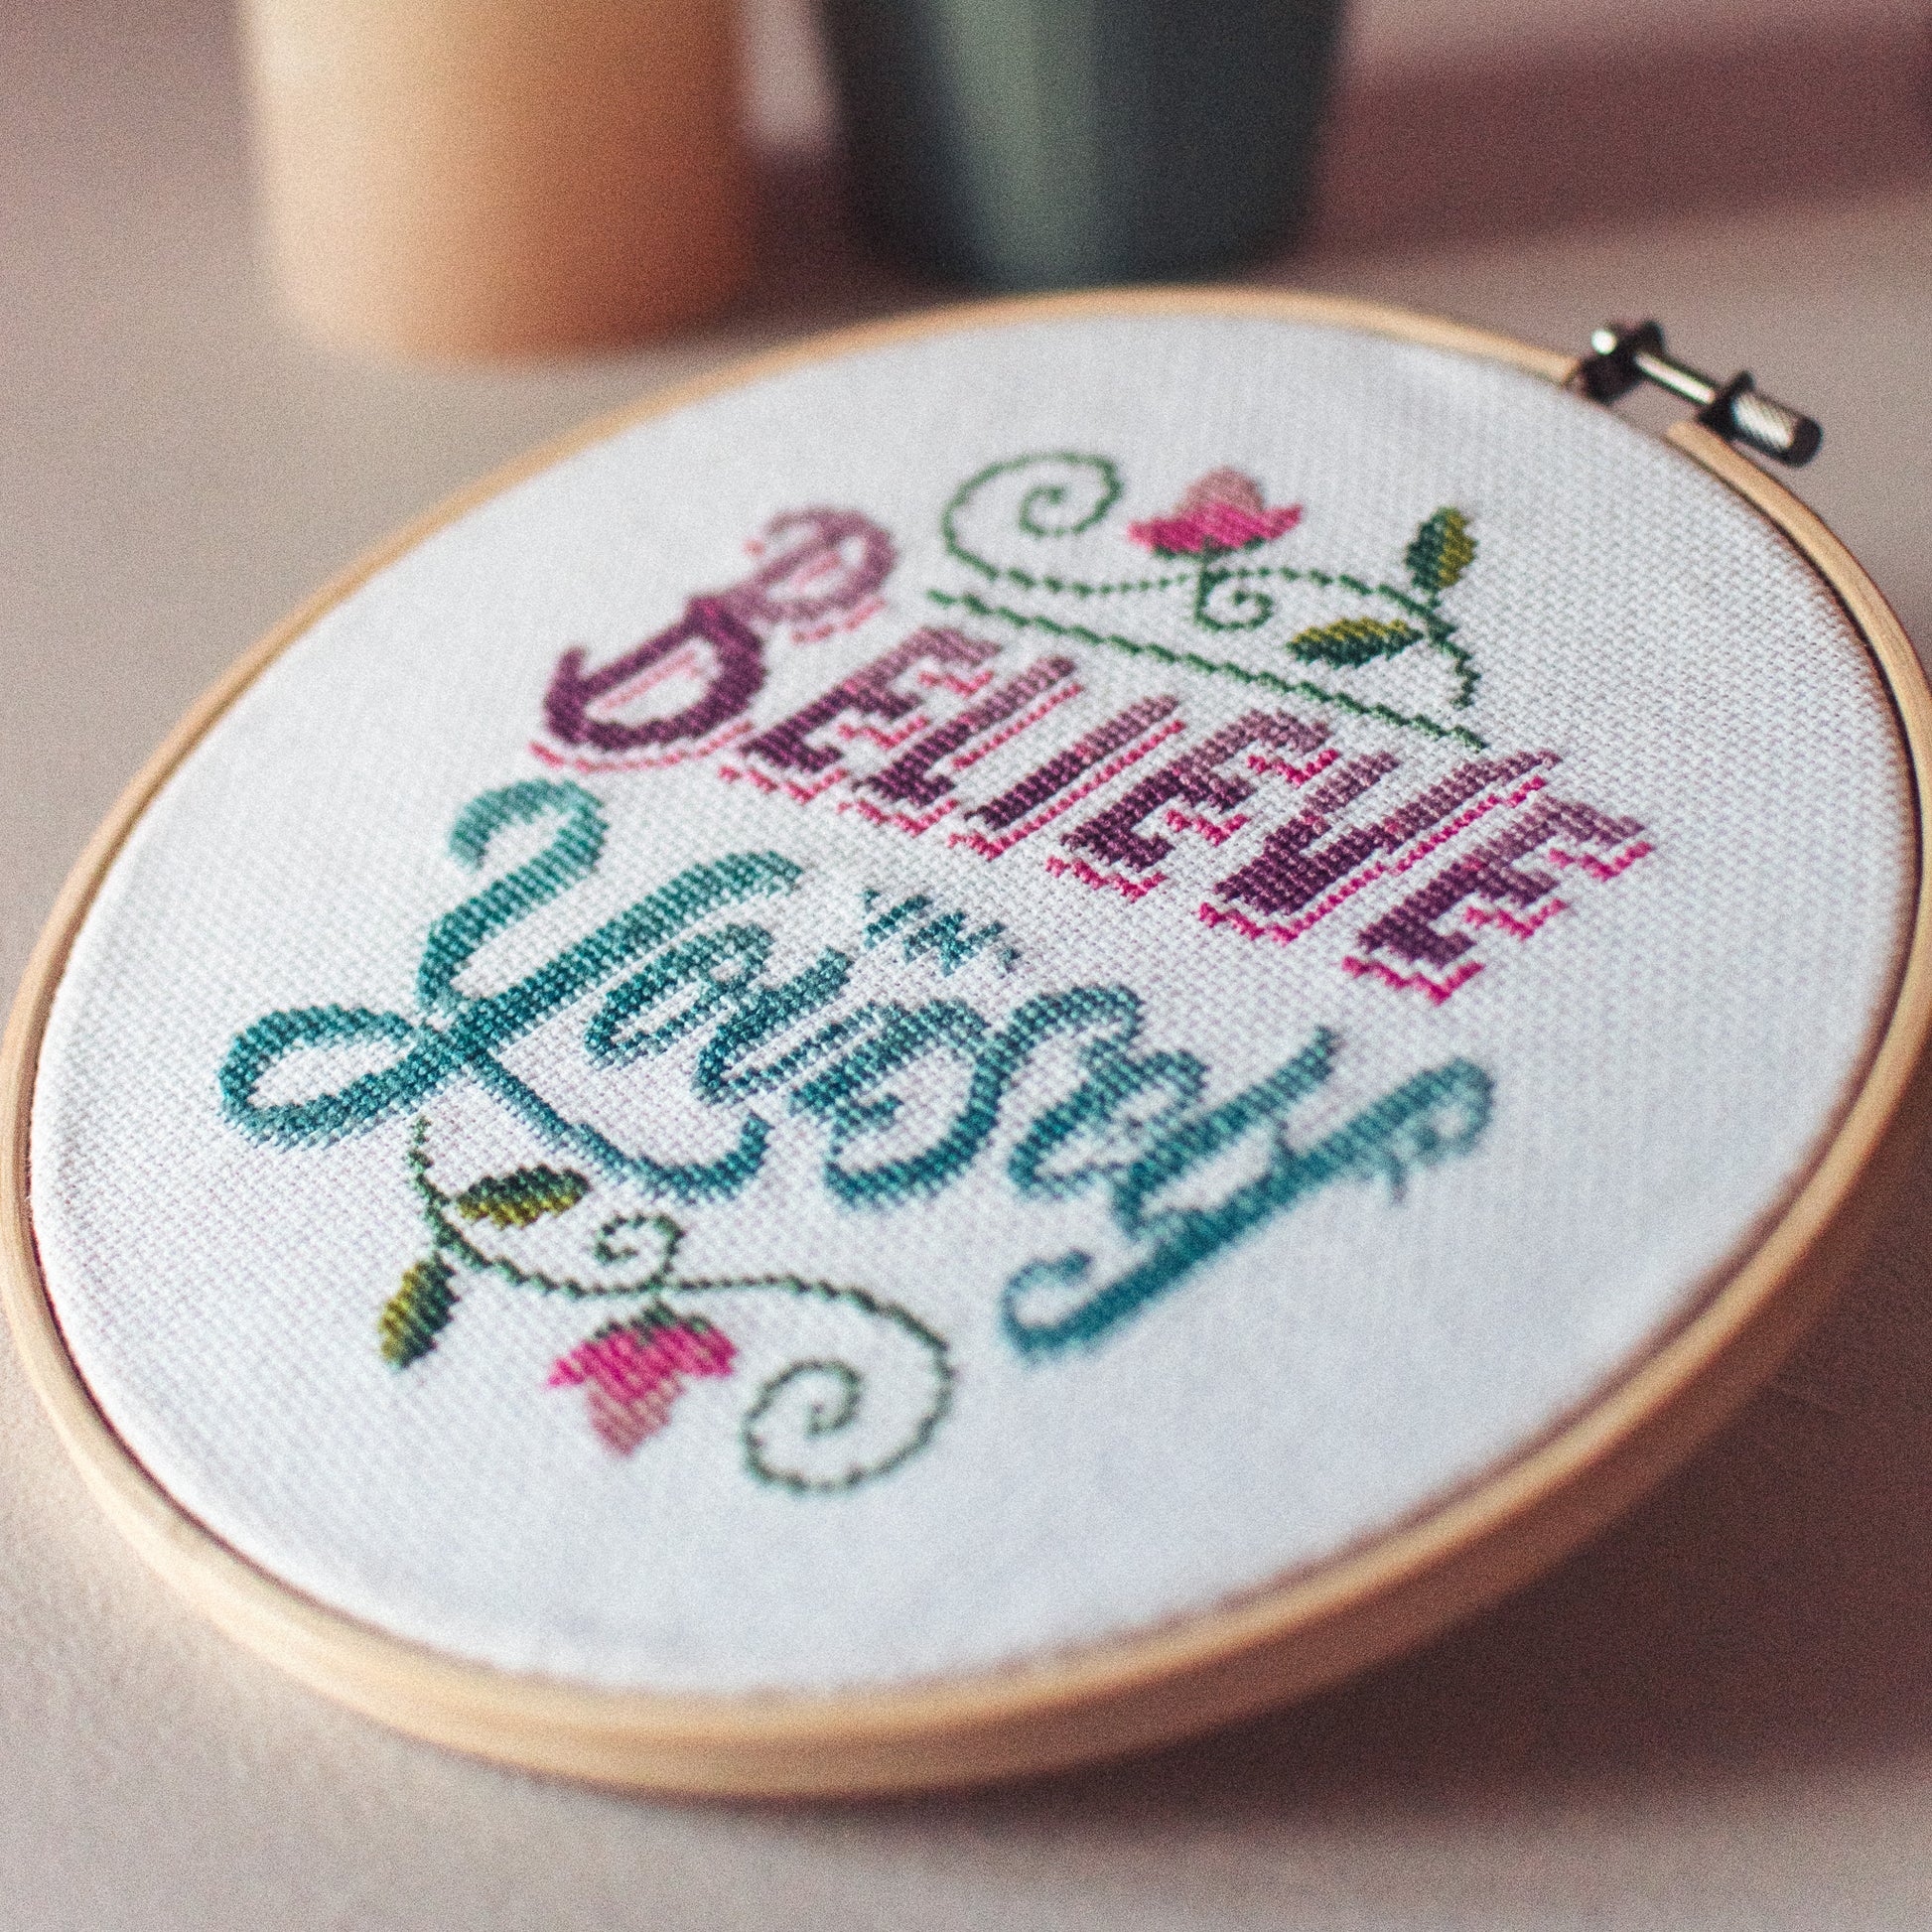 Believe in Yourself Cross Stitch by F&B Crafts